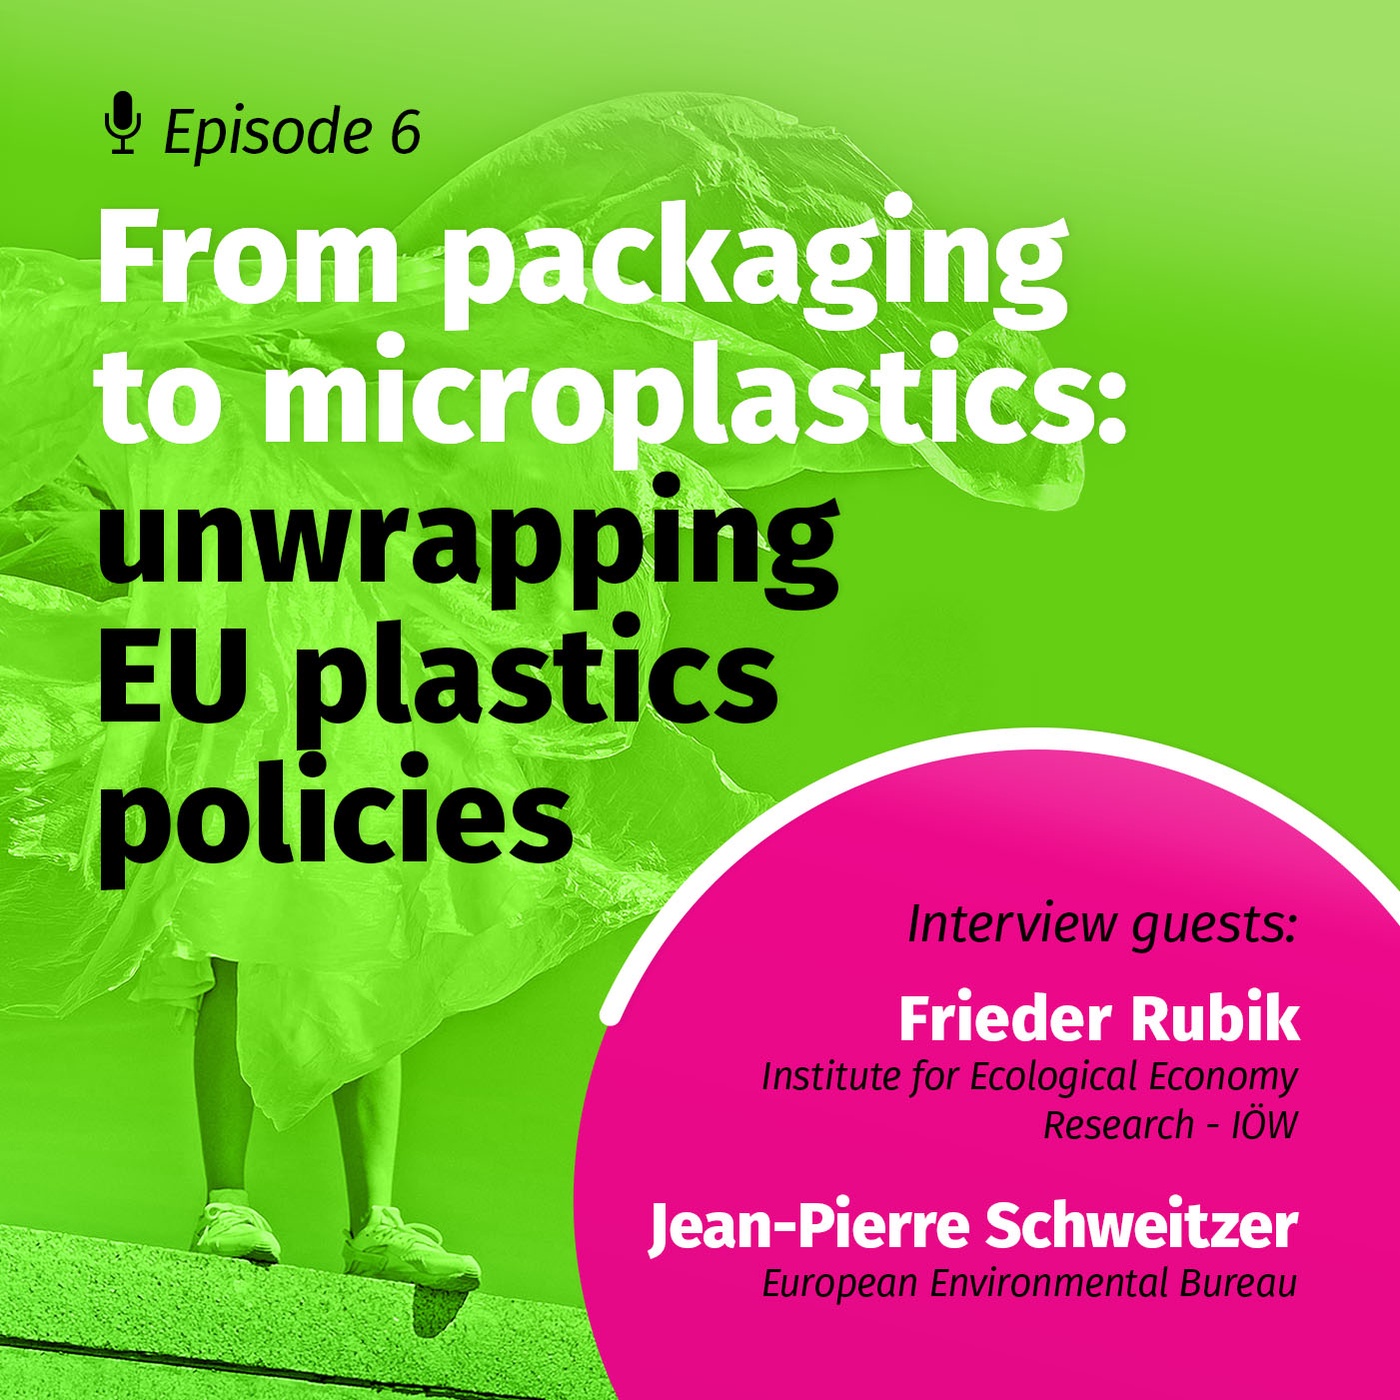 From packaging to microplastics: unwrapping EU plastics policies